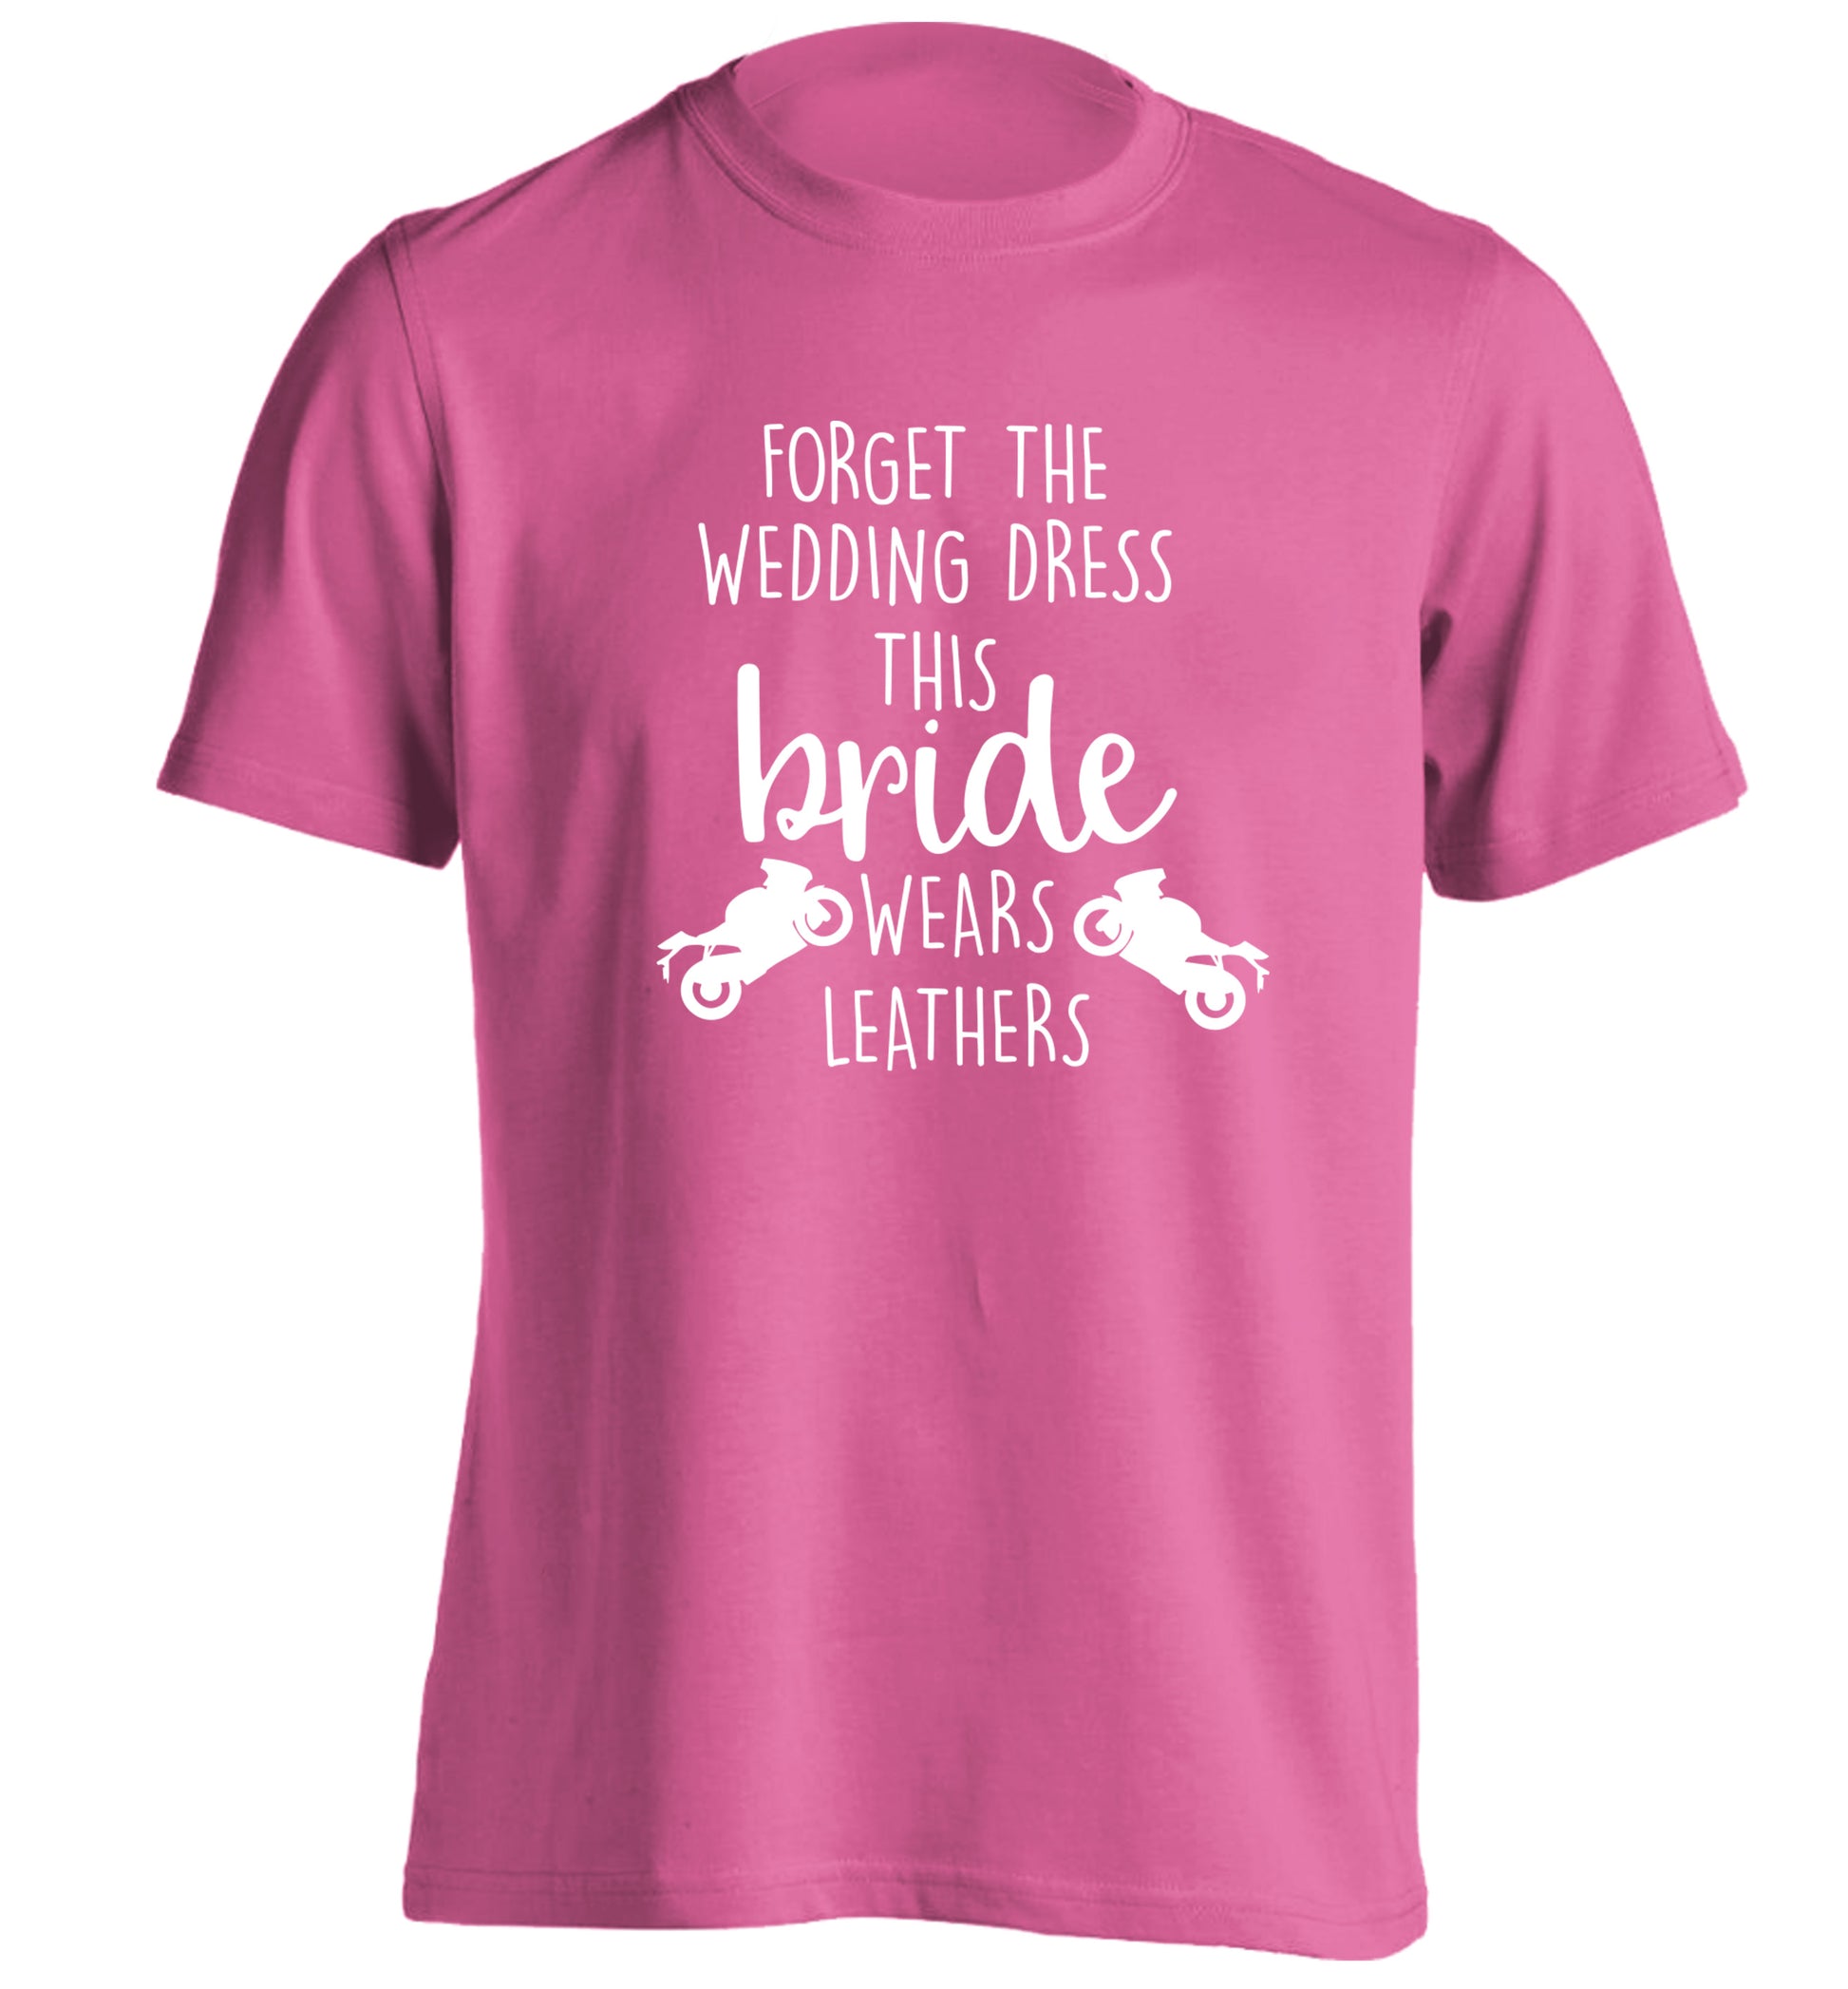 Forget the wedding dress this bride wears leathers adults unisex pink Tshirt 2XL